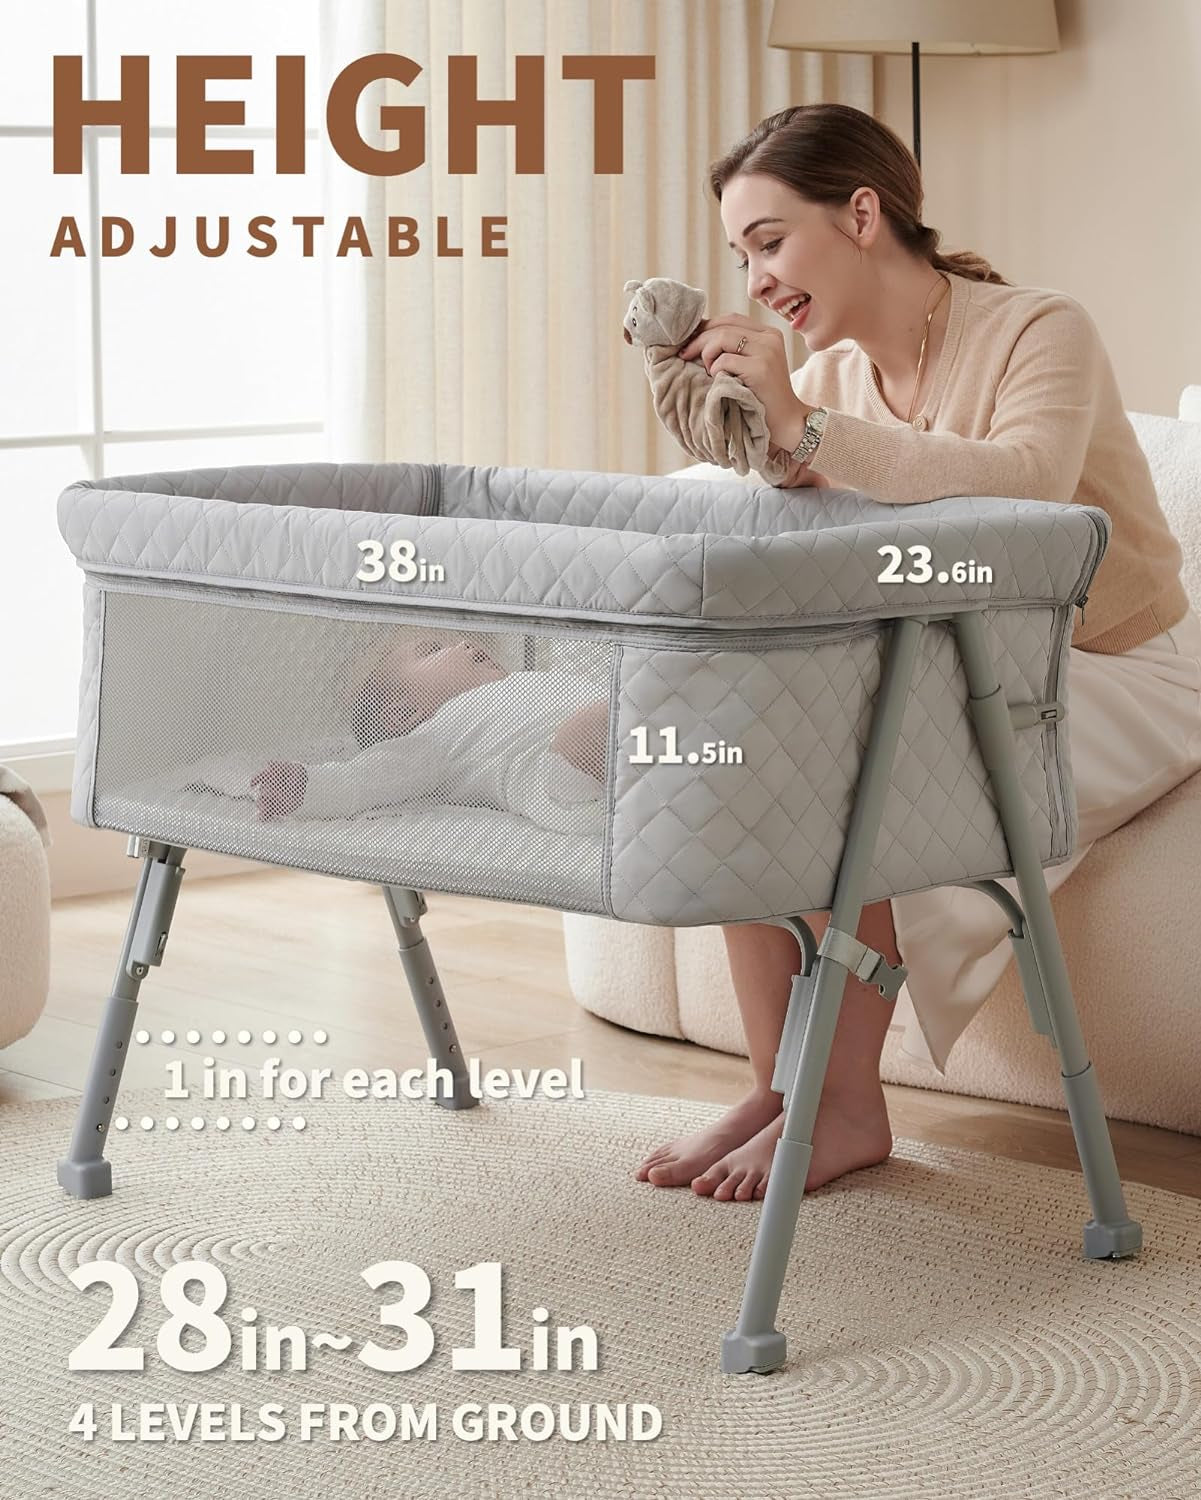 Bassinet Bedside Sleeper, Baby Bed Crib for Newborn, Bedside Crib Sleeper with 4 Auto-Lock & Adjustable Height, Breathable Mesh&Mattress - Design By Technique